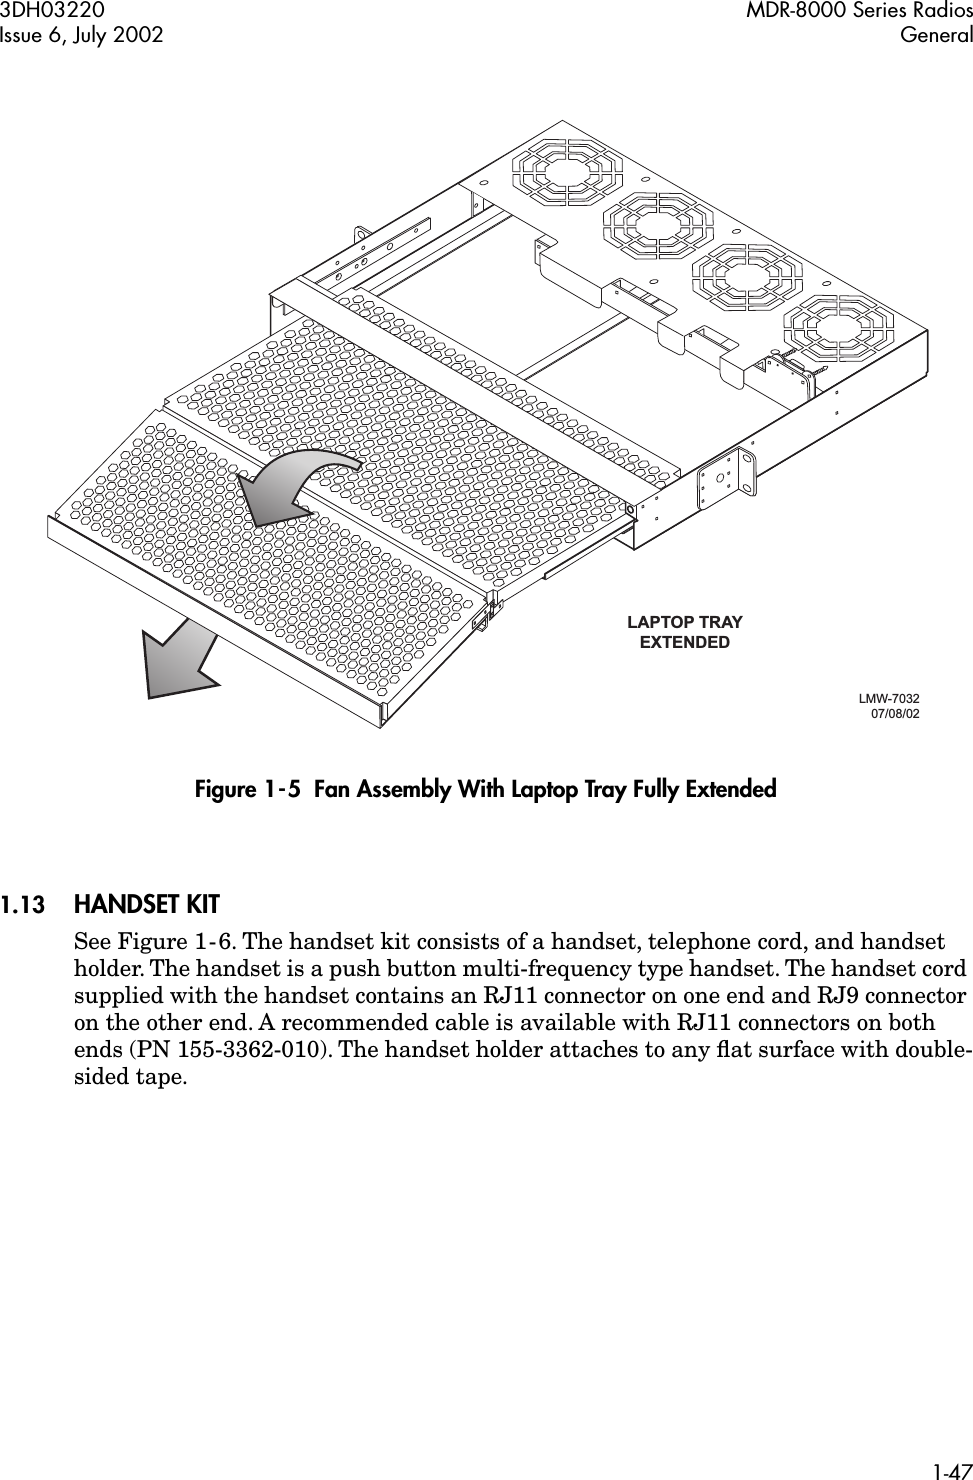 3DH03220 MDR-8000 Series RadiosIssue 6, July 2002 General1-47 Figure 1-5  Fan Assembly With Laptop Tray Fully Extended1.13 HANDSET KITSee Figure 1-6. The handset kit consists of a handset, telephone cord, and handset holder. The handset is a push button multi-frequency type handset. The handset cord supplied with the handset contains an RJ11 connector on one end and RJ9 connector on the other end. A recommended cable is available with RJ11 connectors on both ends (PN 155-3362-010). The handset holder attaches to any ﬂat surface with double-sided tape.LAPTOP TRAYEXTENDEDLMW-7032 07/08/02